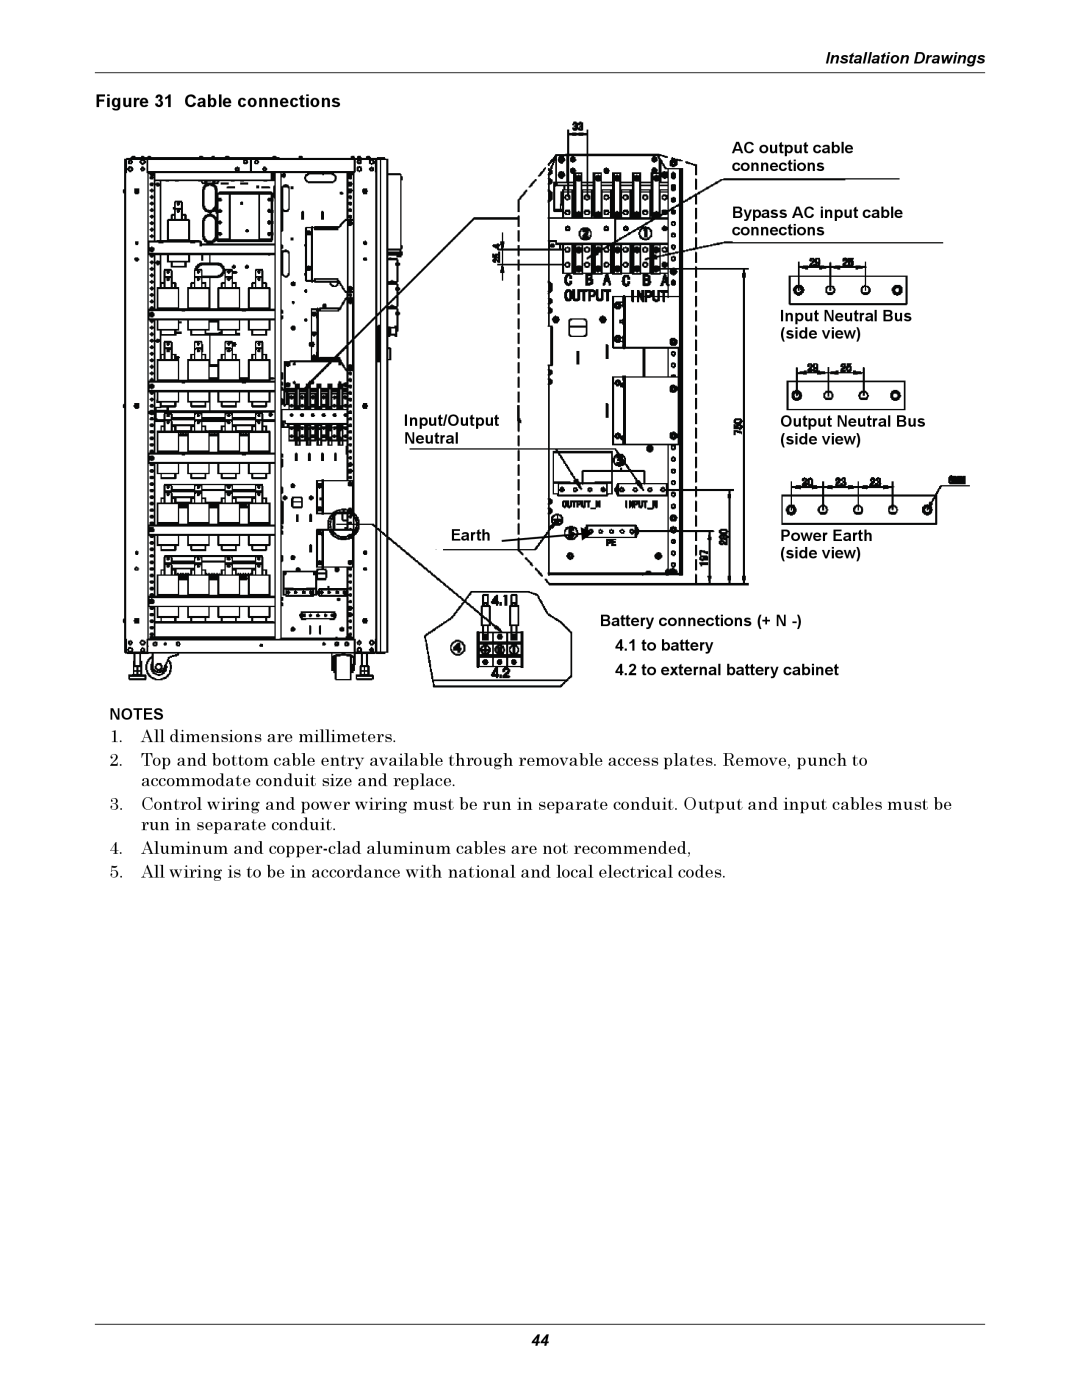 Emerson 10-30kVA, 208V installation manual Cable connections 